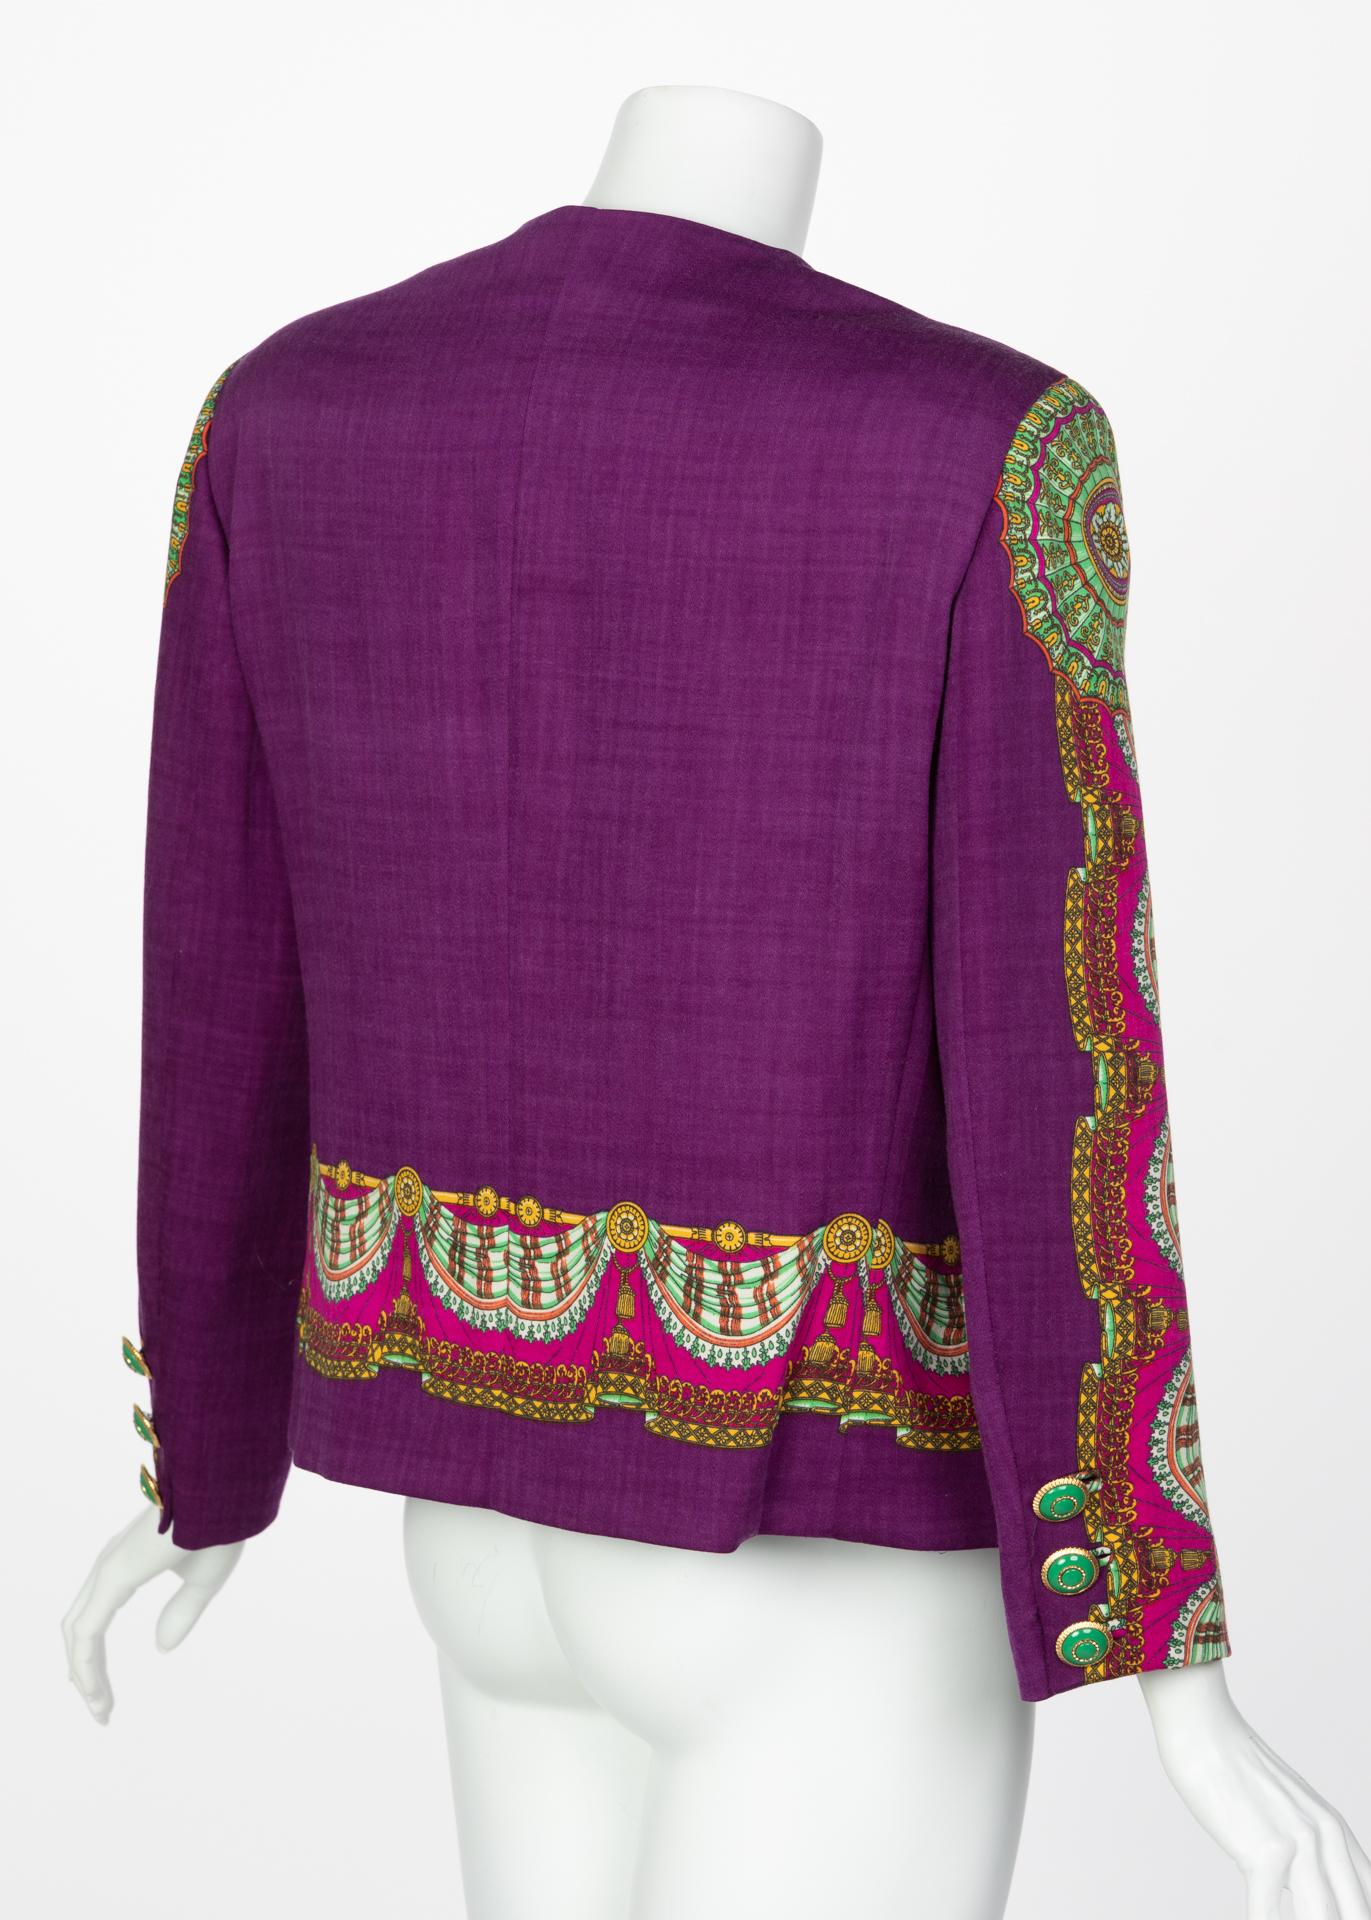 Gianni Versace Couture Purple Green Print Jacket, 1990s For Sale 3